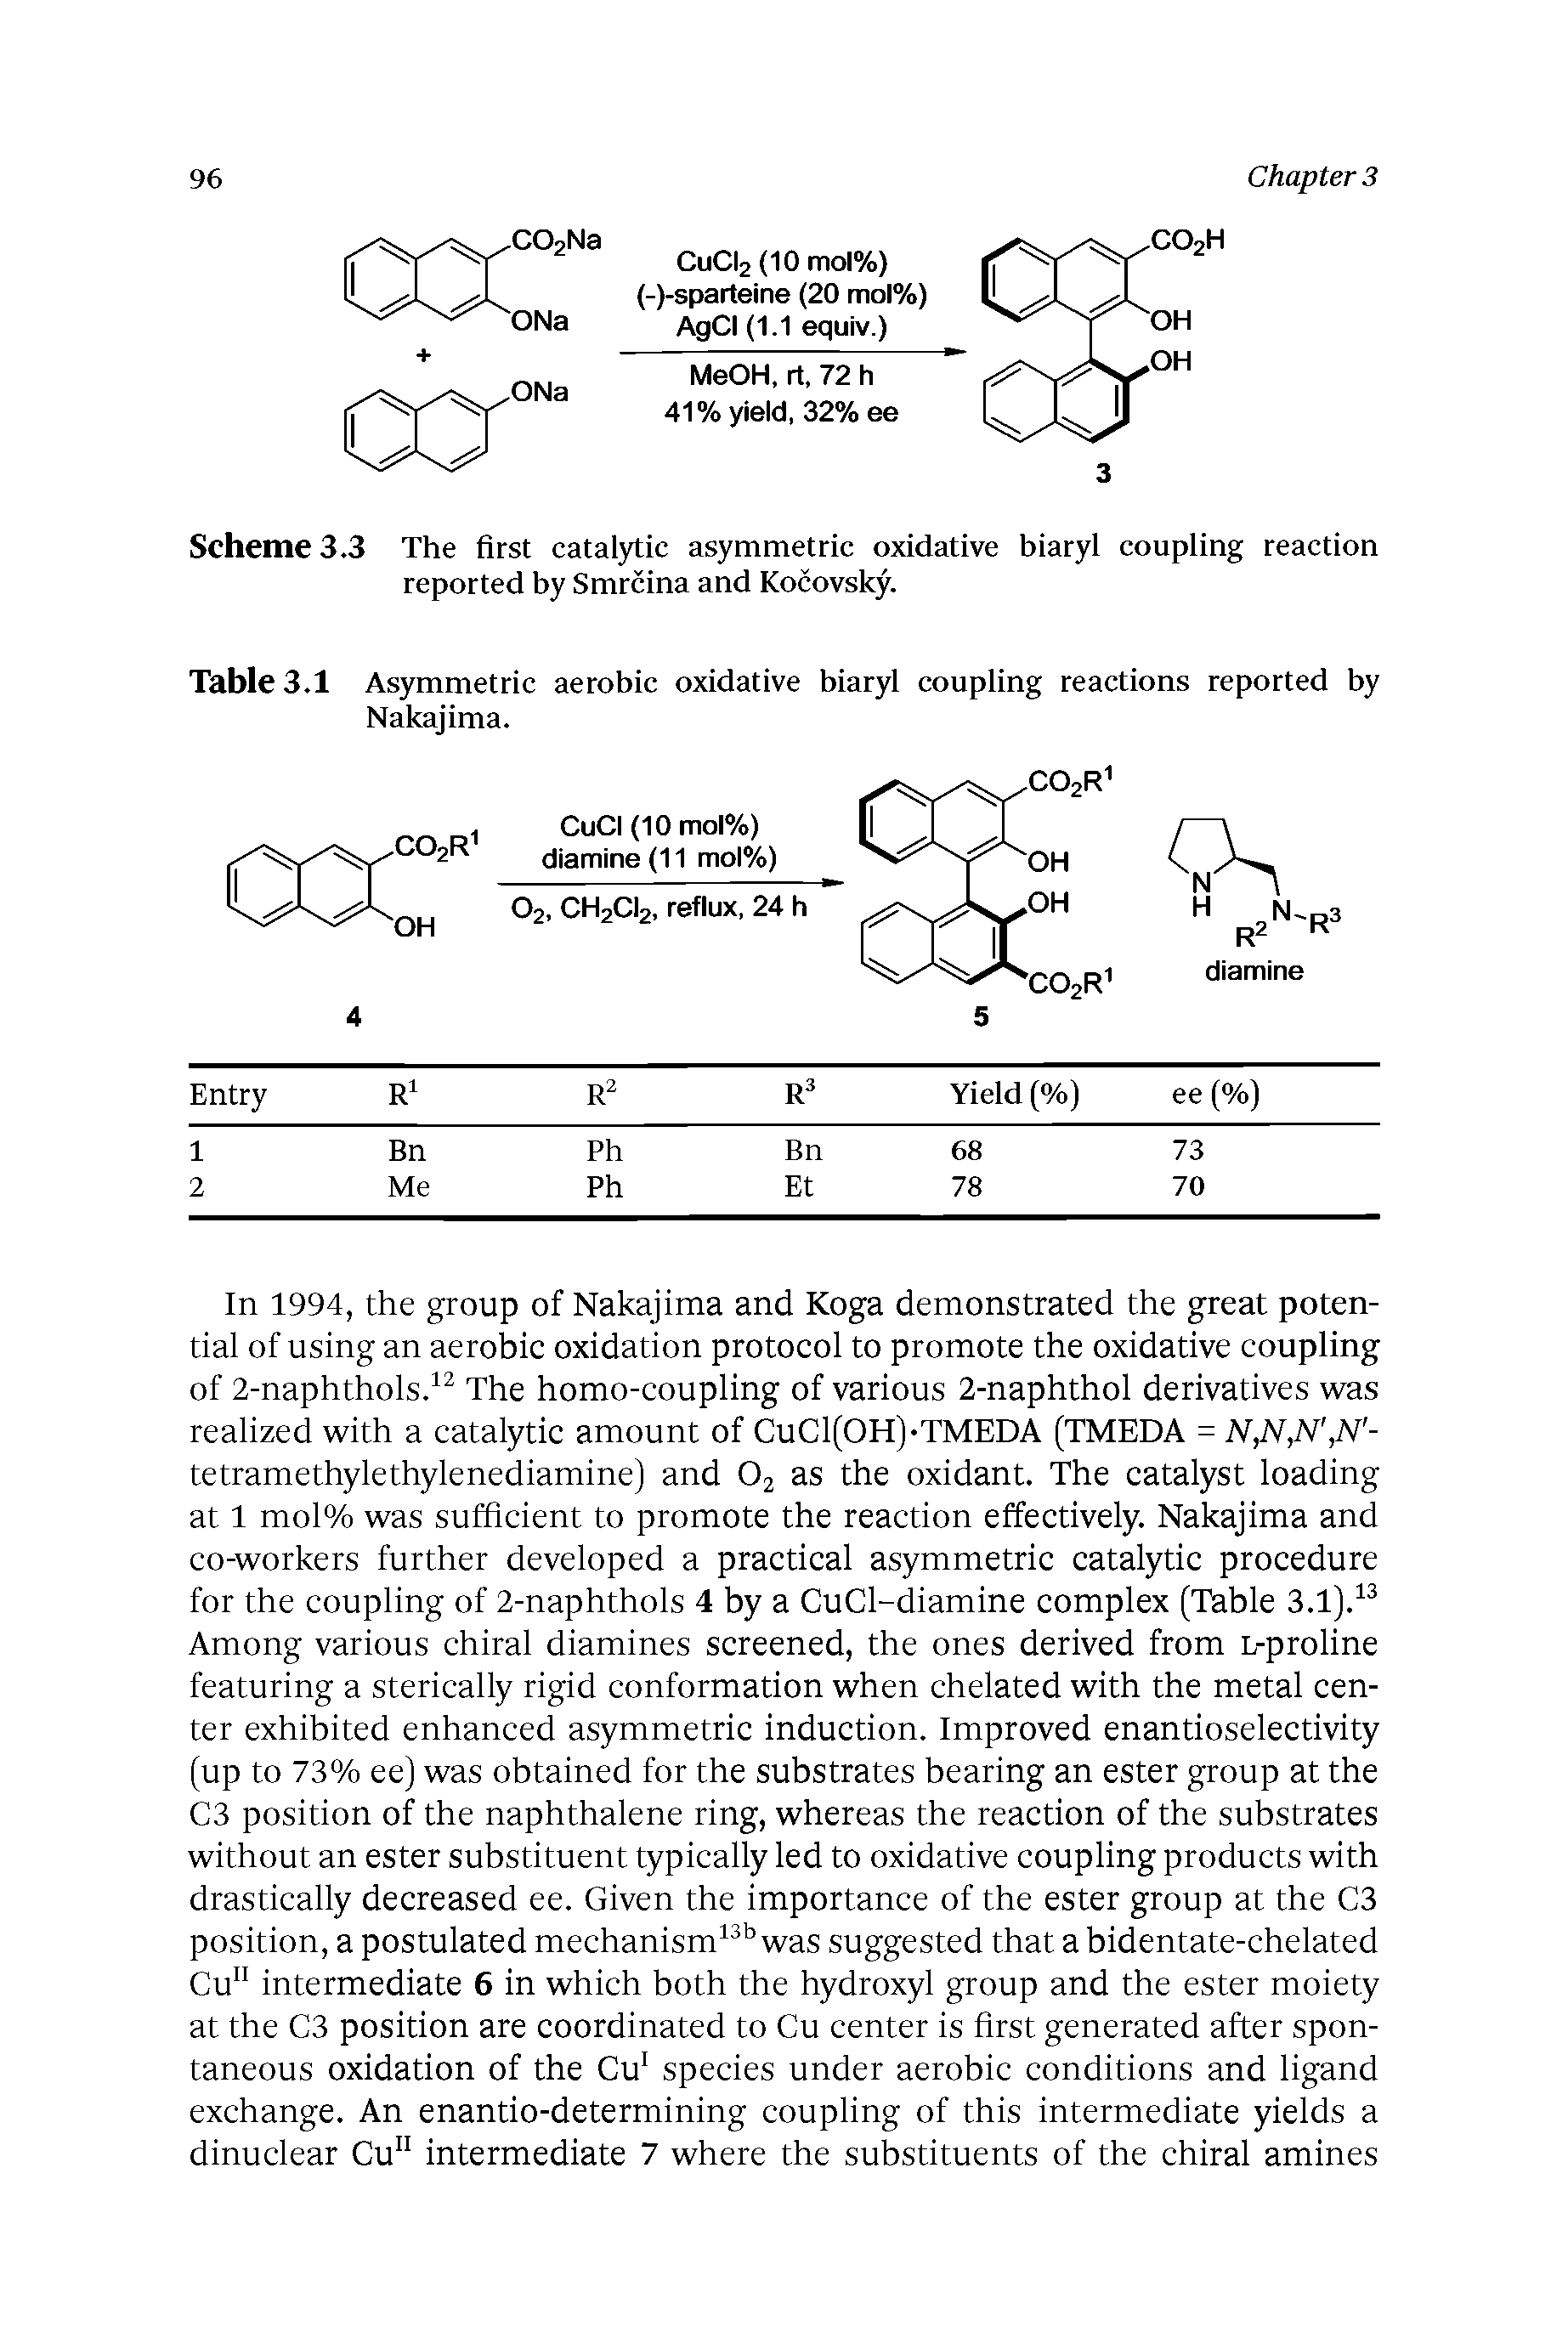 Scheme 3.3 The first catalytic asymmetric oxidative biaryl coupling reaction reported by Smrcina and Kocovsky.